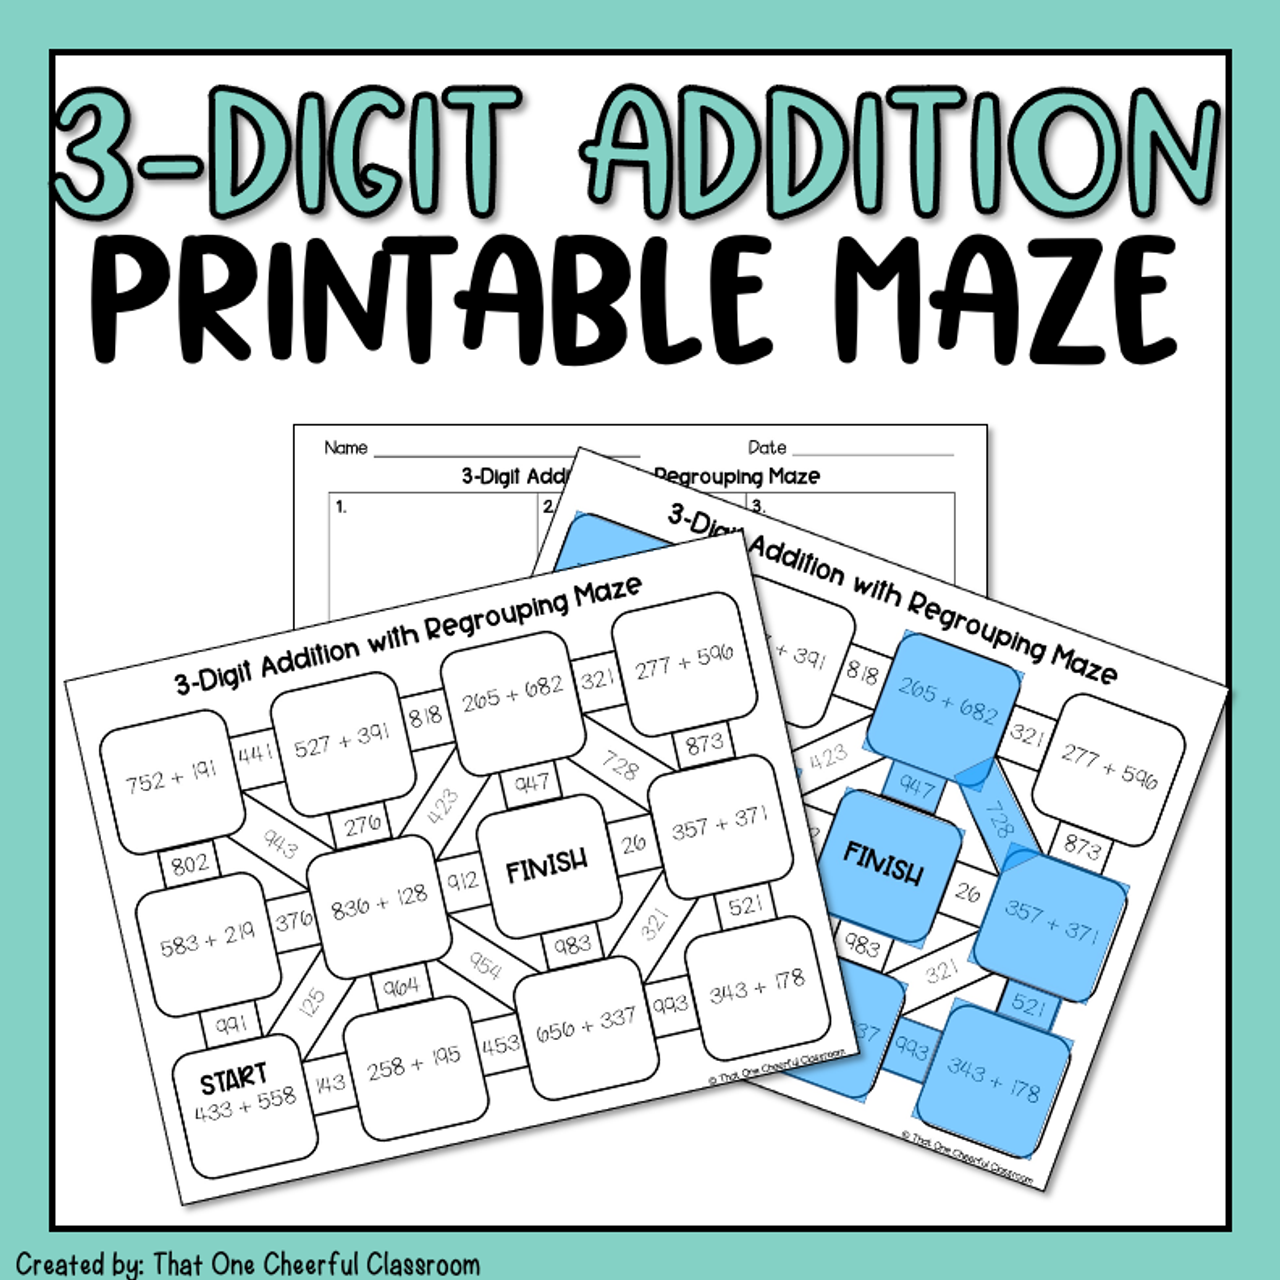 3-Digit Addition with Regrouping Printable Maze Activity